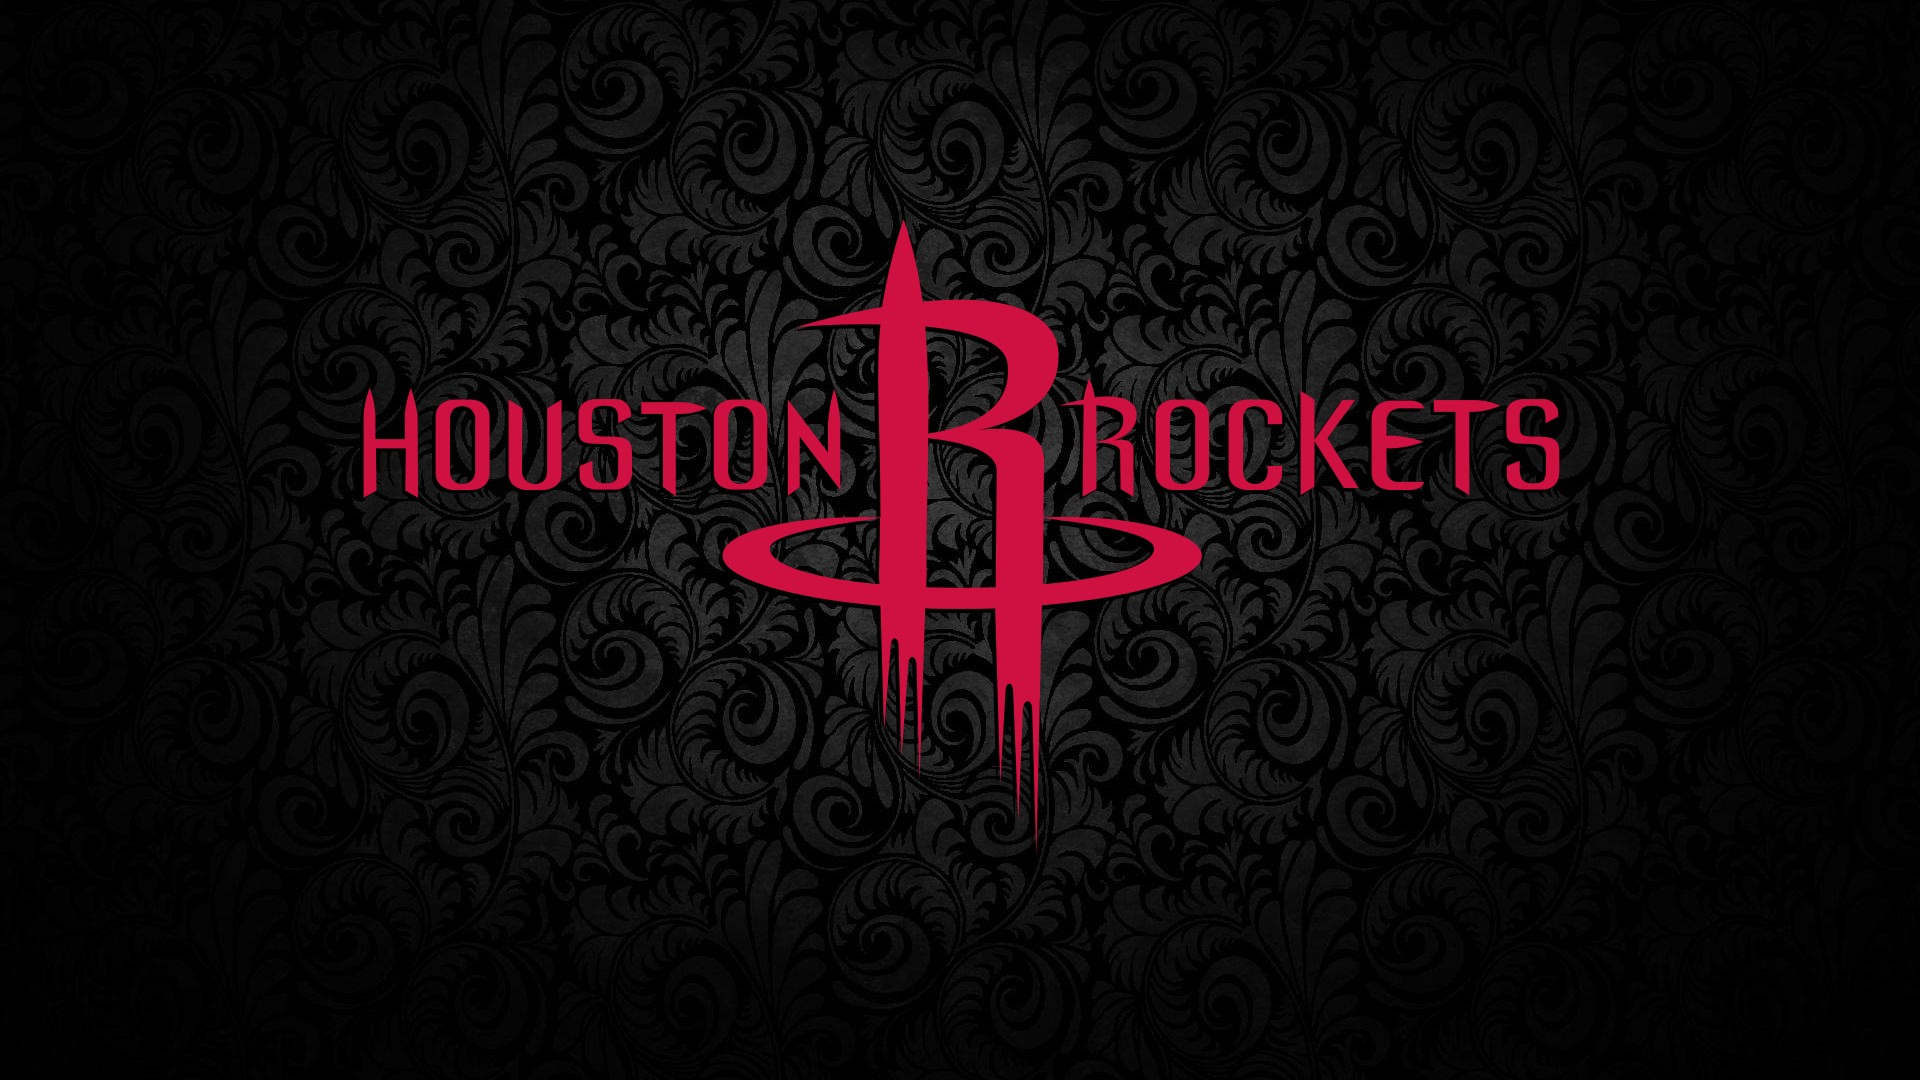 Wallpapers Houston Rockets with image dimensions 1920x1080 pixel. You can make this wallpaper for your Desktop Computer Backgrounds, Windows or Mac Screensavers, iPhone Lock screen, Tablet or Android and another Mobile Phone device